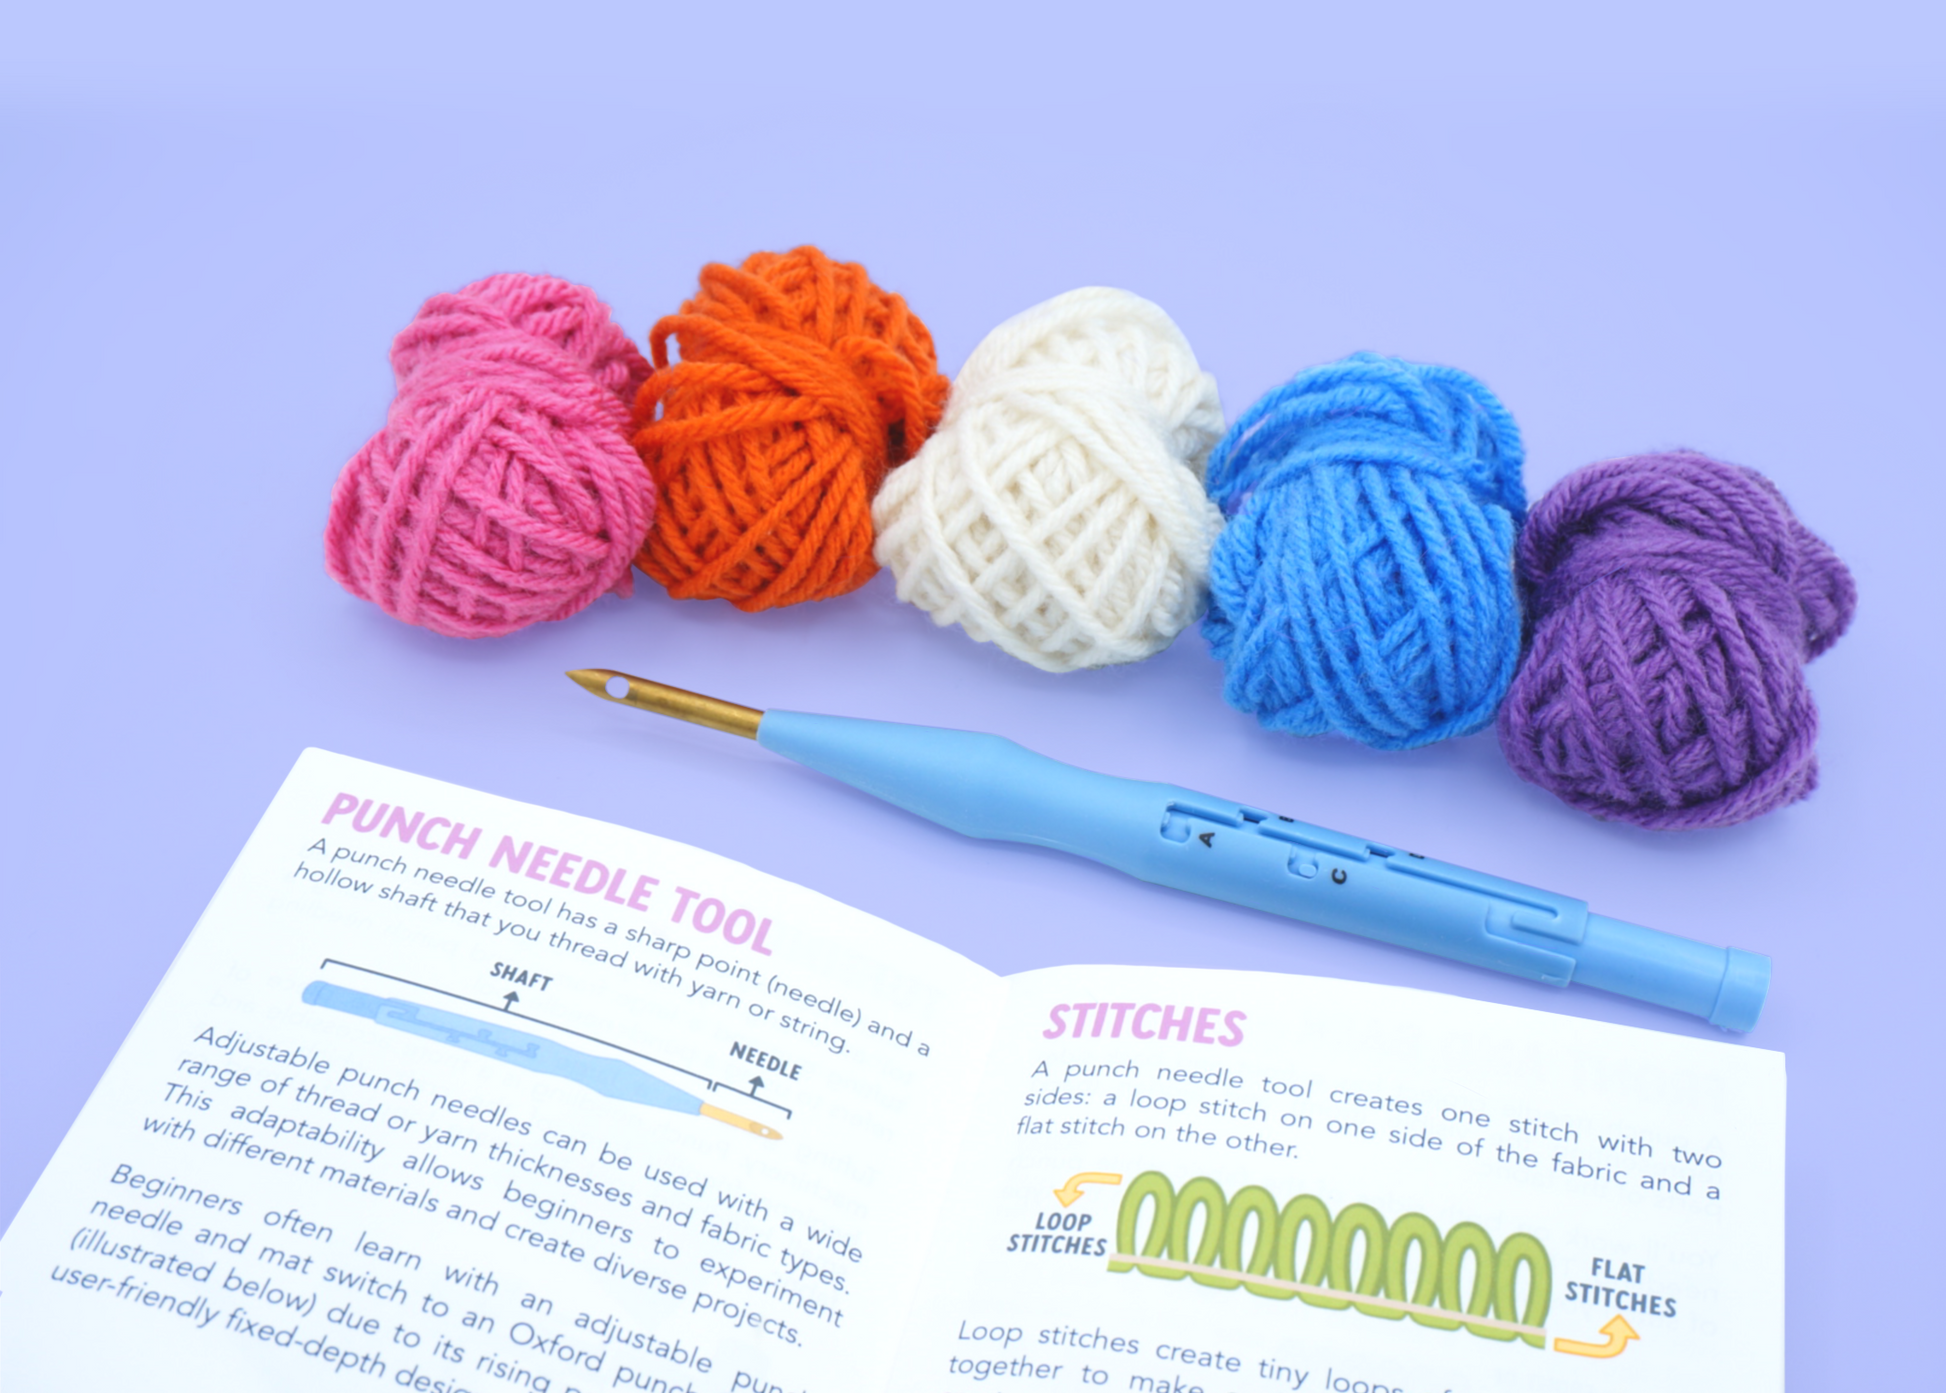 Flower Punch Needles Start Kit/ Beginner Punch Needle Kit With Adjustable  Punch Needle/ Punch Needle Kit With Yarn/all Materials Included 